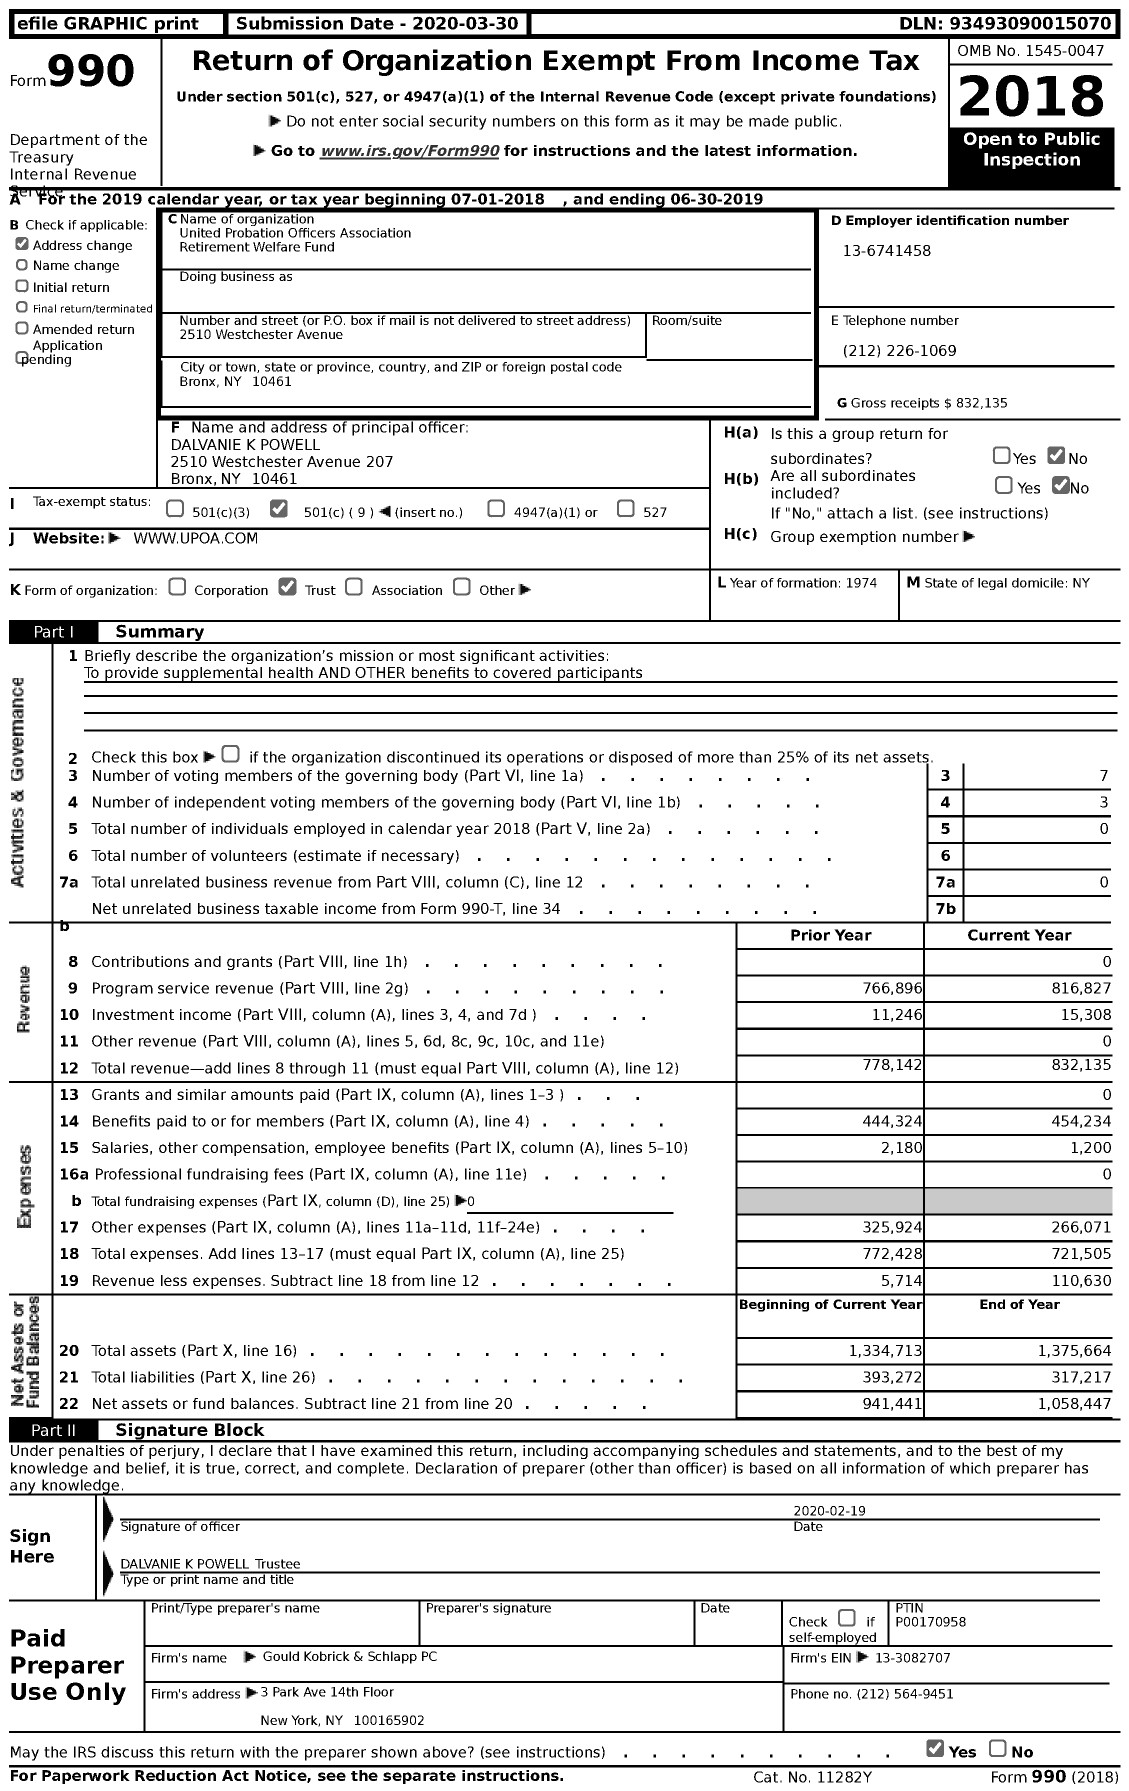 Image of first page of 2018 Form 990 for United Probation Officers Association Retirement Welfare Fund